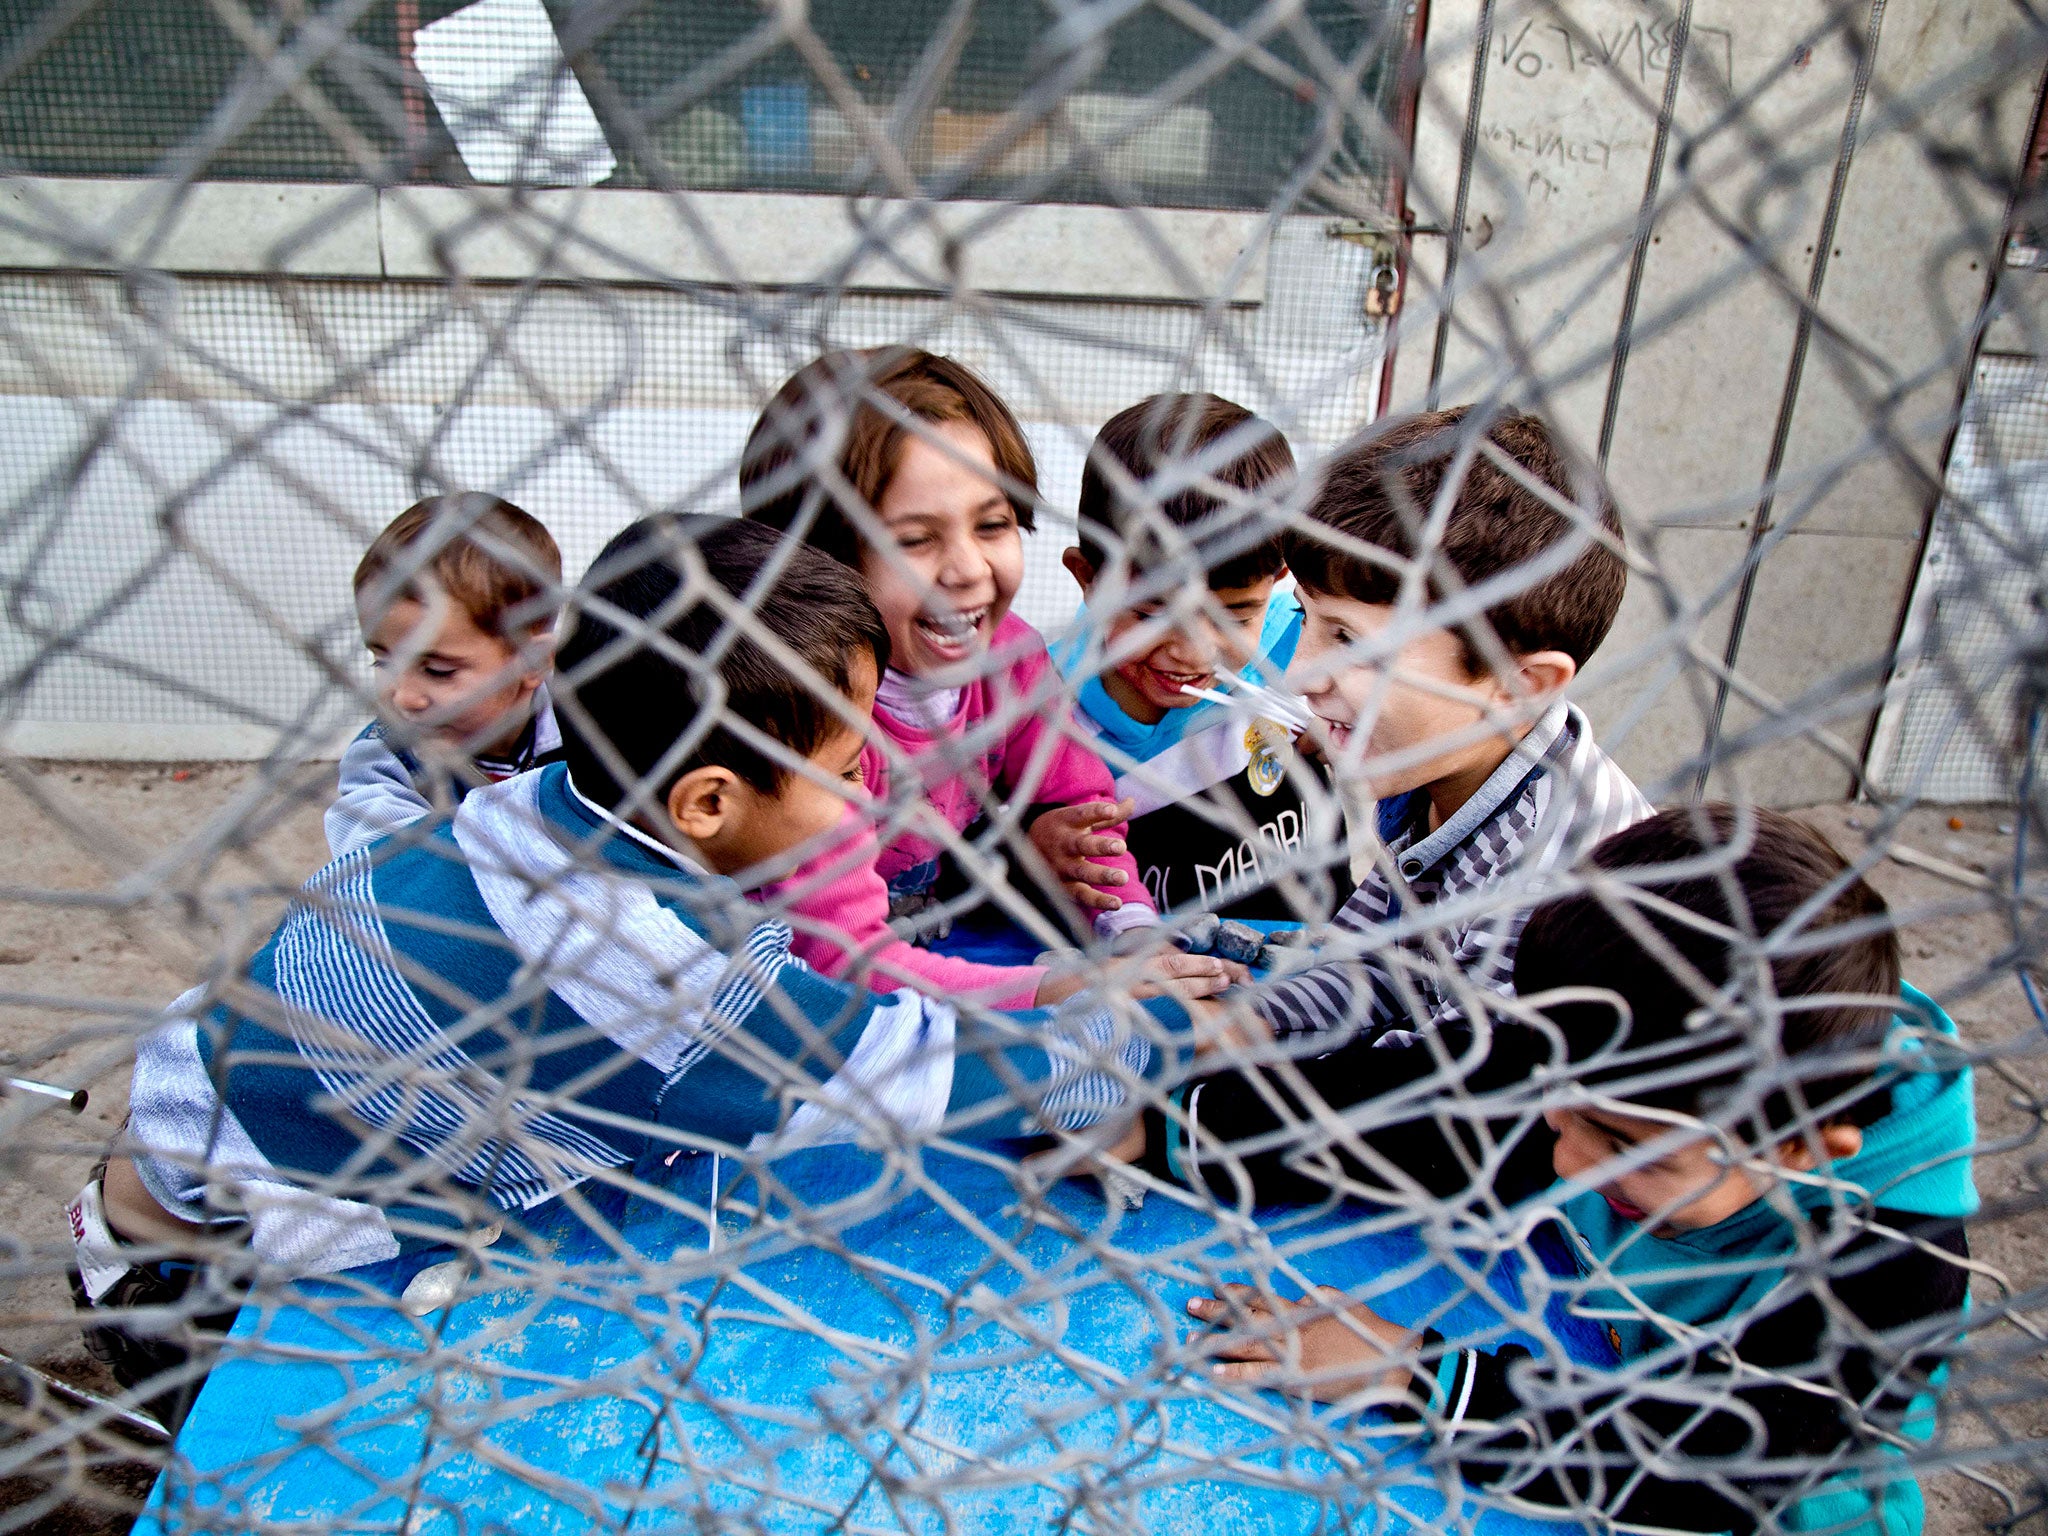 Syrian refugee children play at a temporary refugee camp in Irbil, northern Iraq